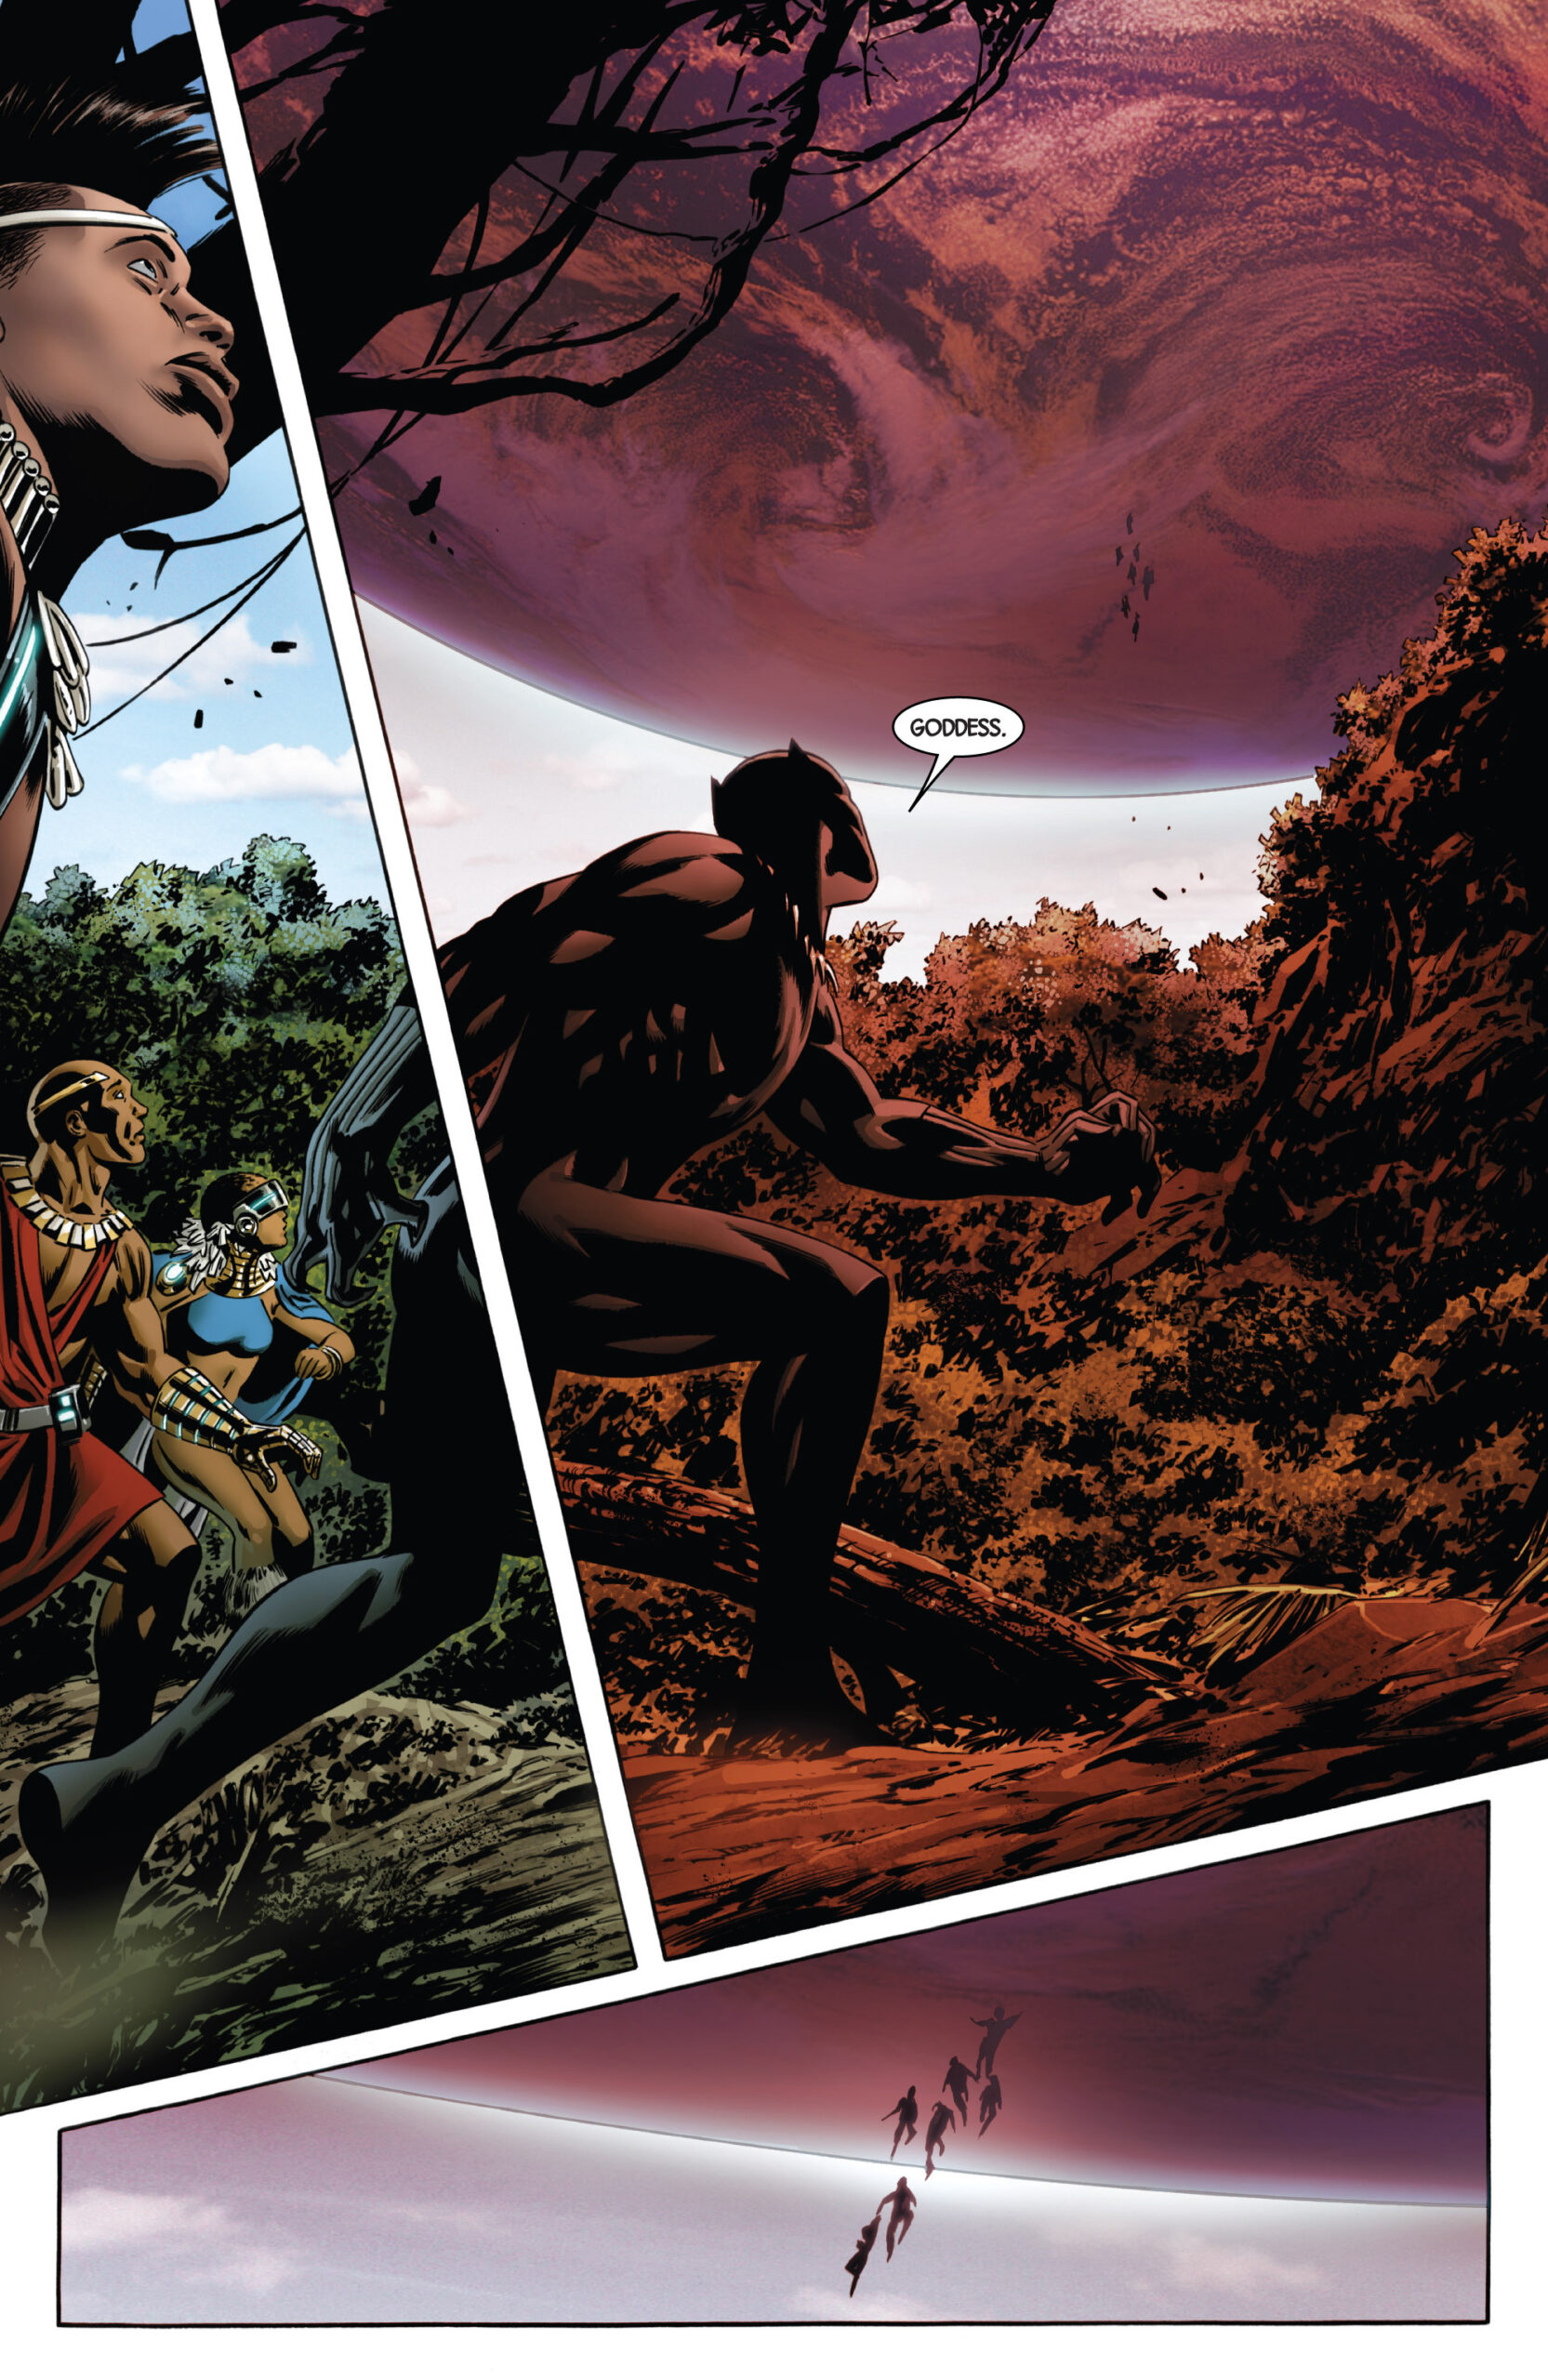 The Black Panther discovers an incursion involving Earth-616 in New Avengers Vol. 3 #1 "Memento Mori" (2013), Marvel Comics. Words by Jonathan Hickman, art by Steve Epting, Rick Magyar, Frank D'Armata, and Joe Caramagna.